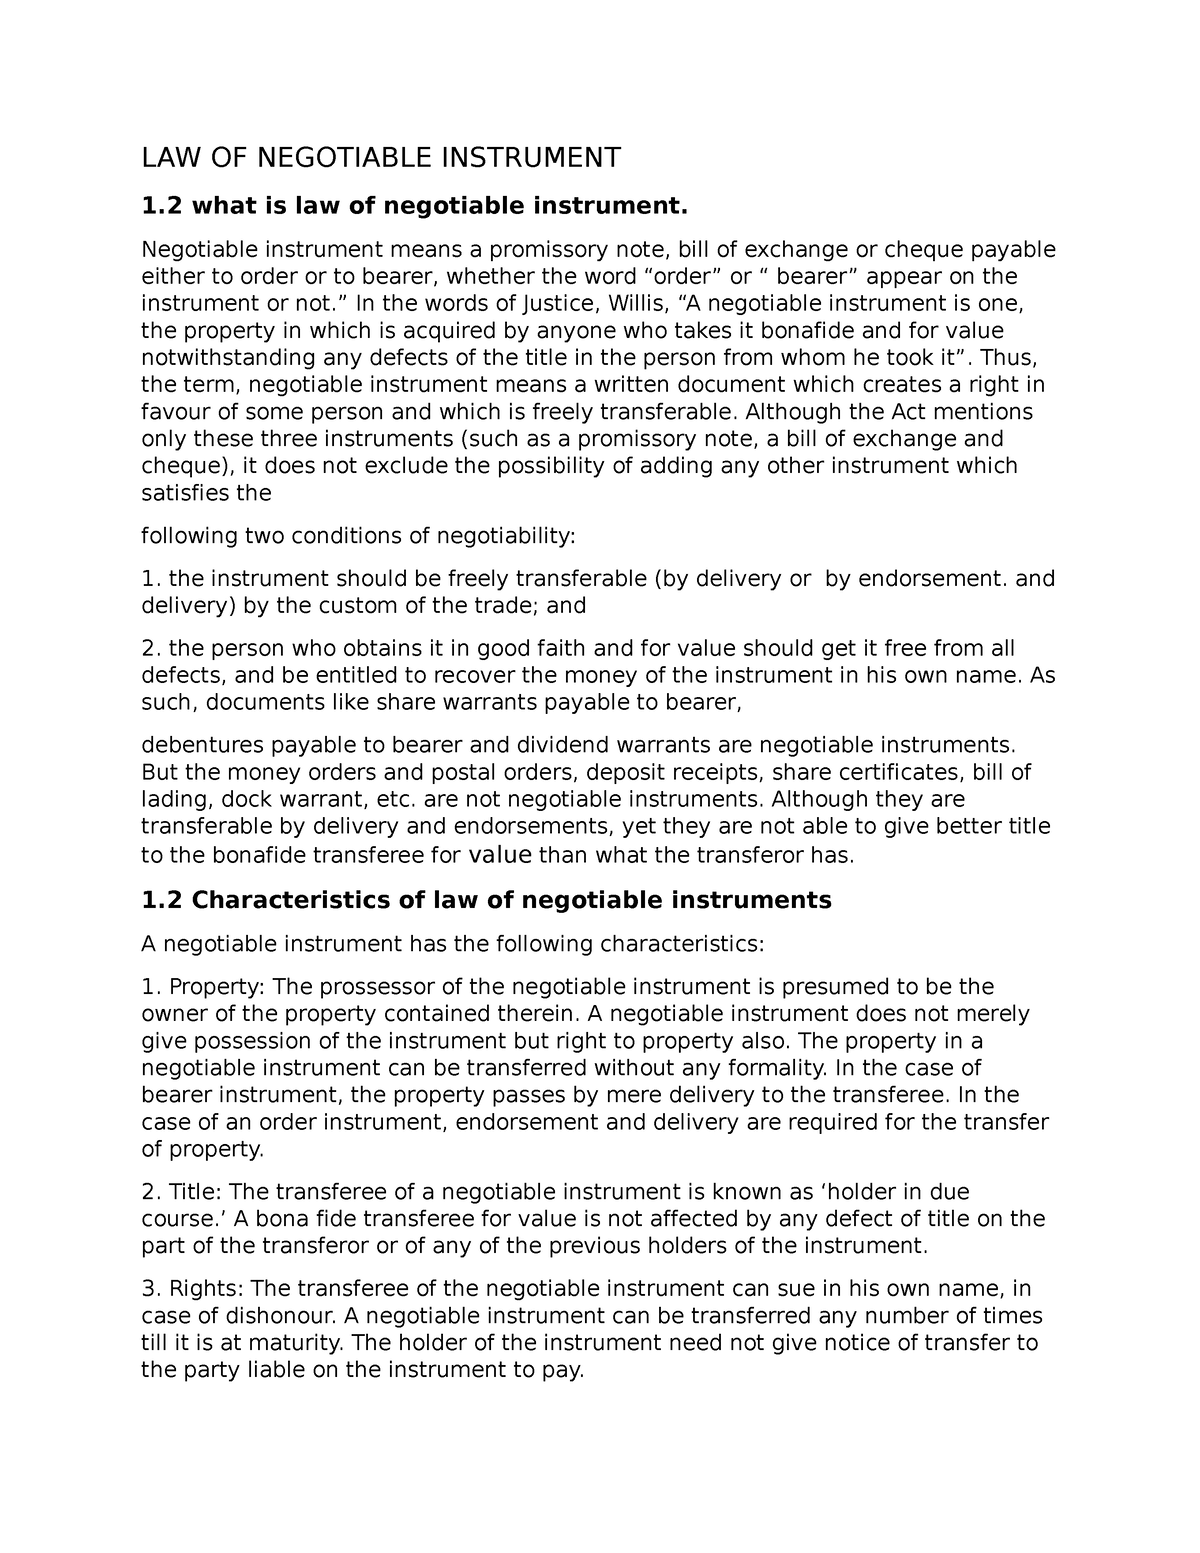 under a contract an assignment of negotiable instruments